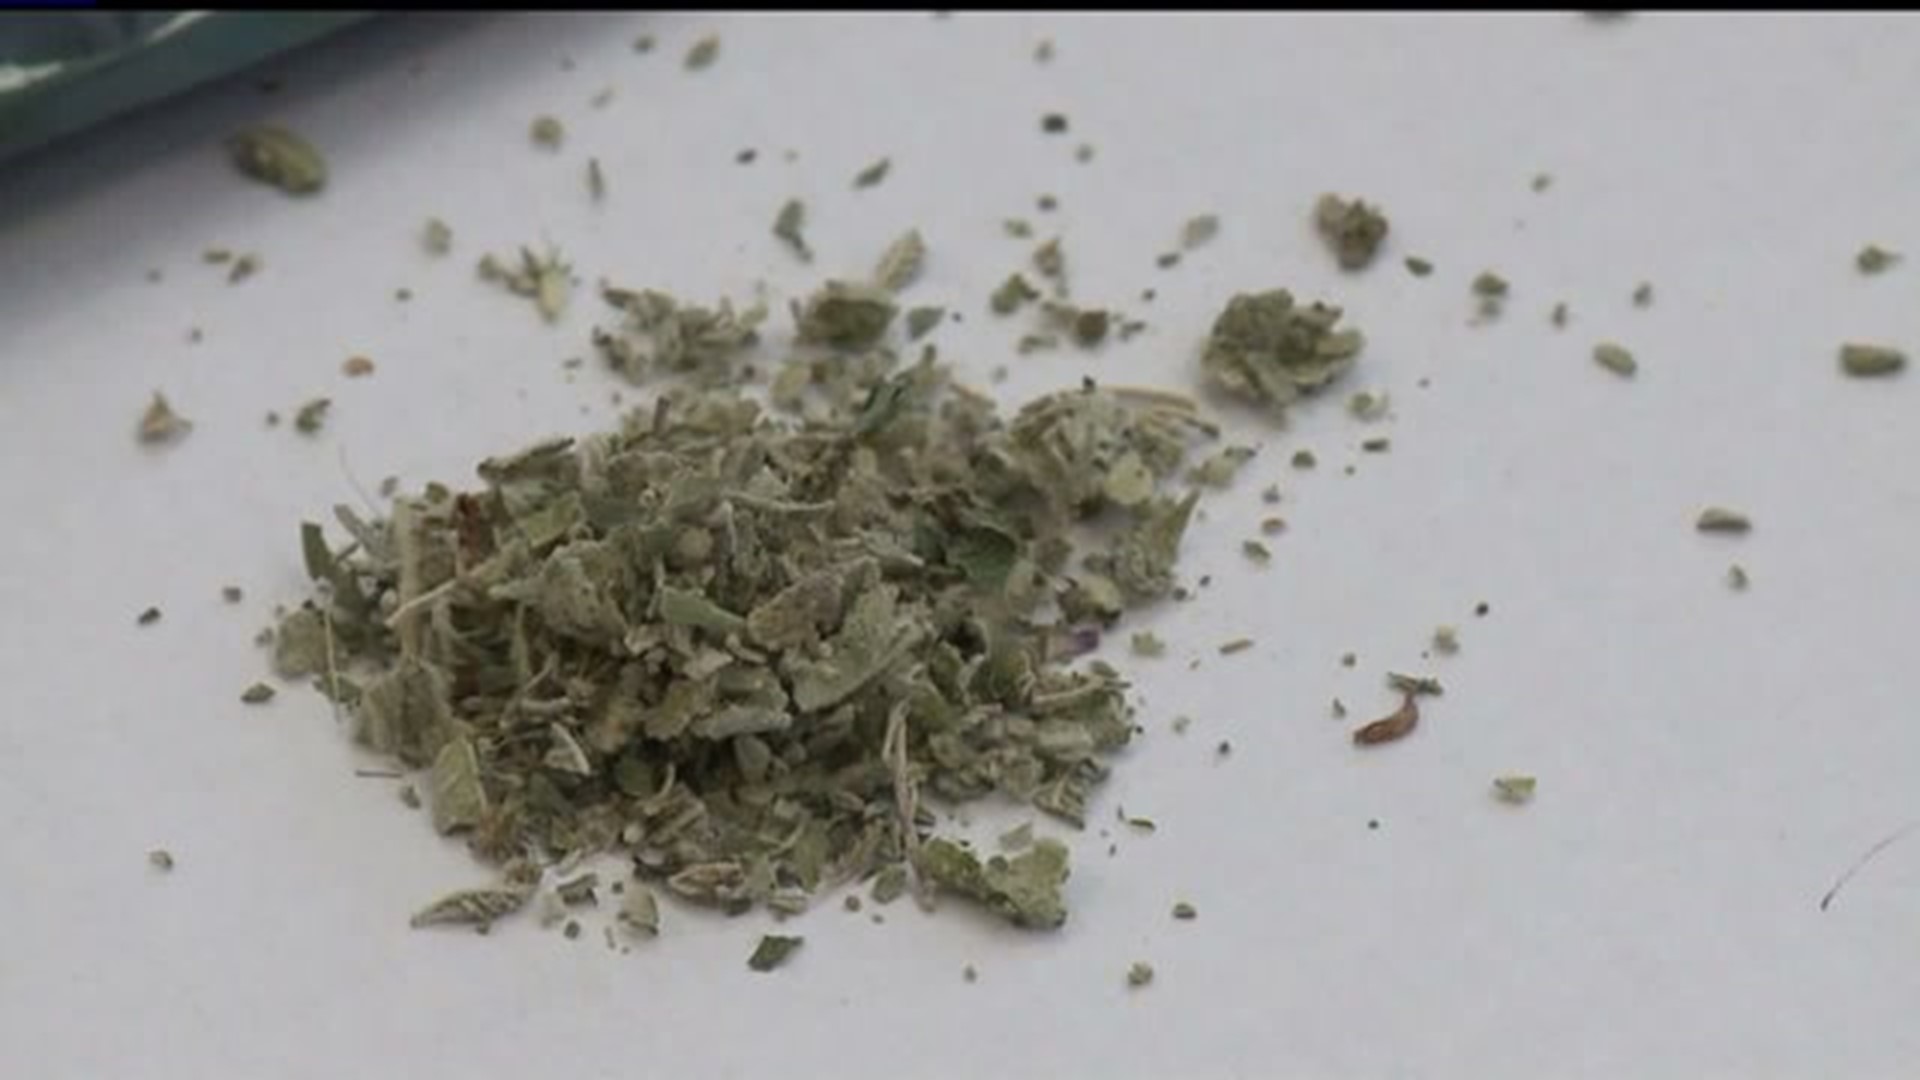 Synthetic marijuana now "epidemic" in Central PA